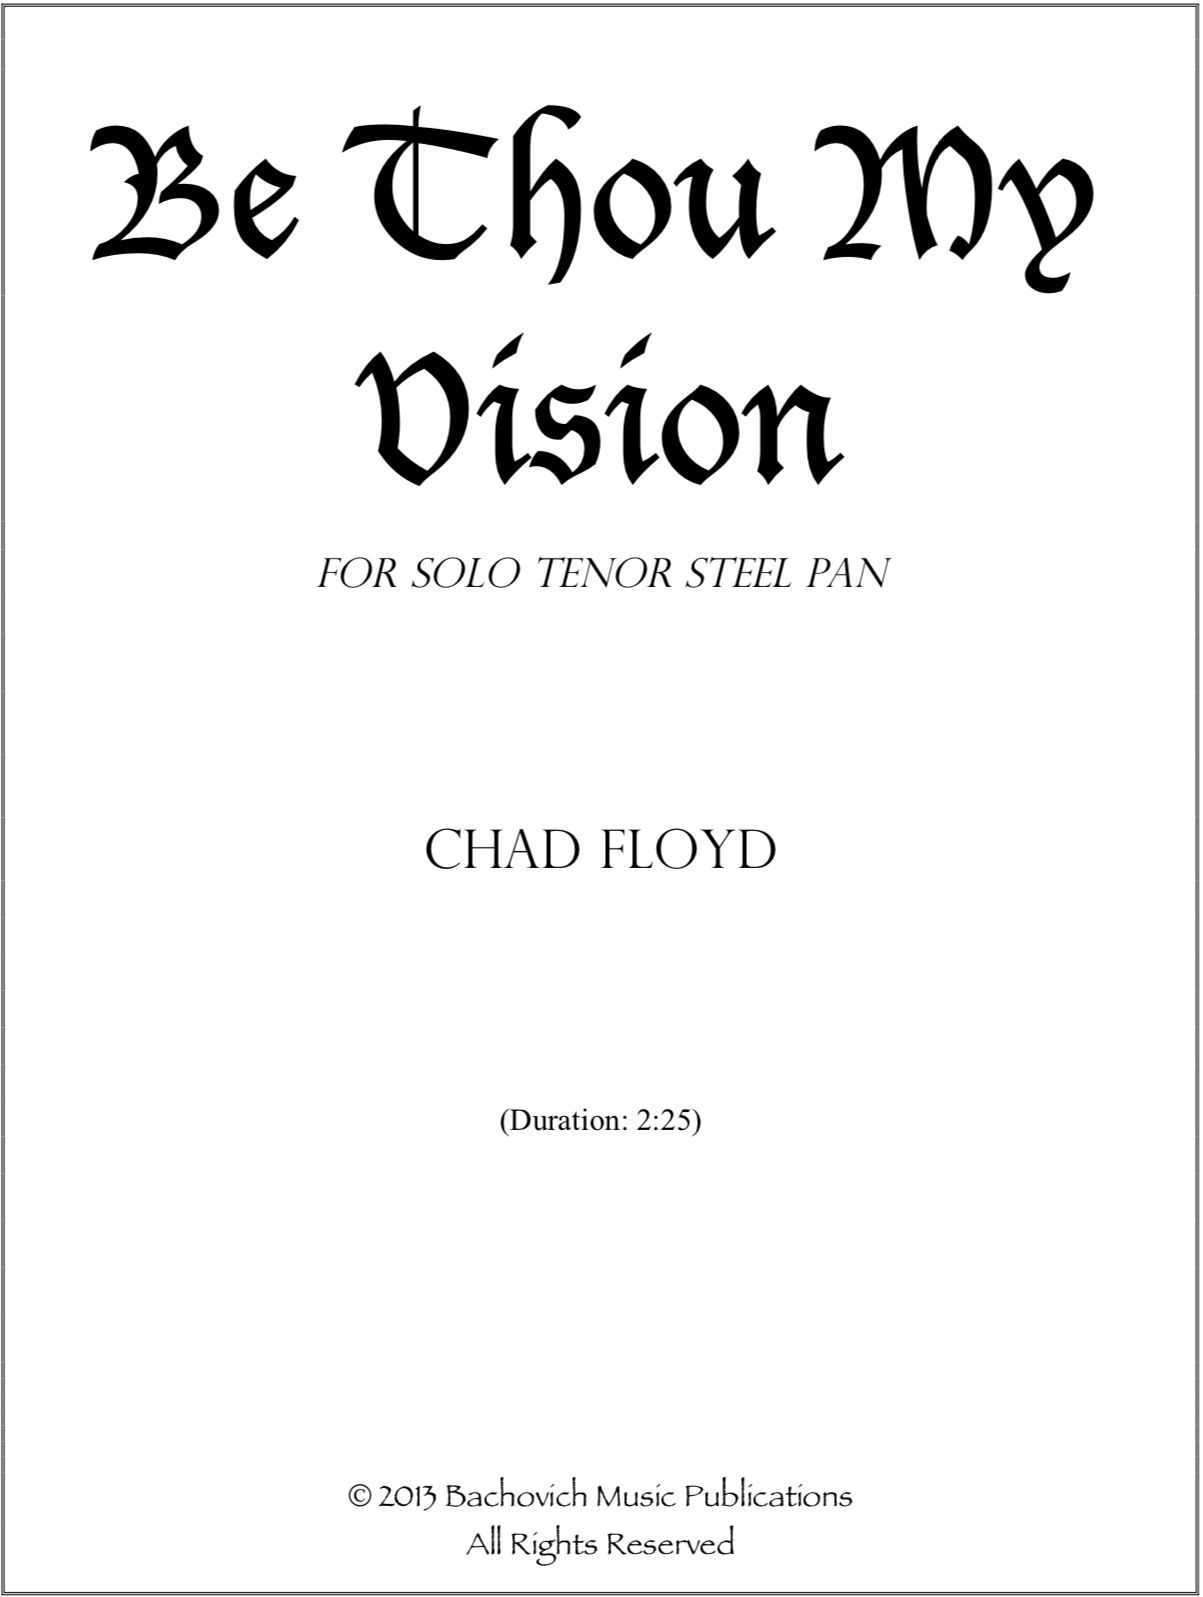 Be Thou My Vision Chords Be Thou My Vision Chad Floyd